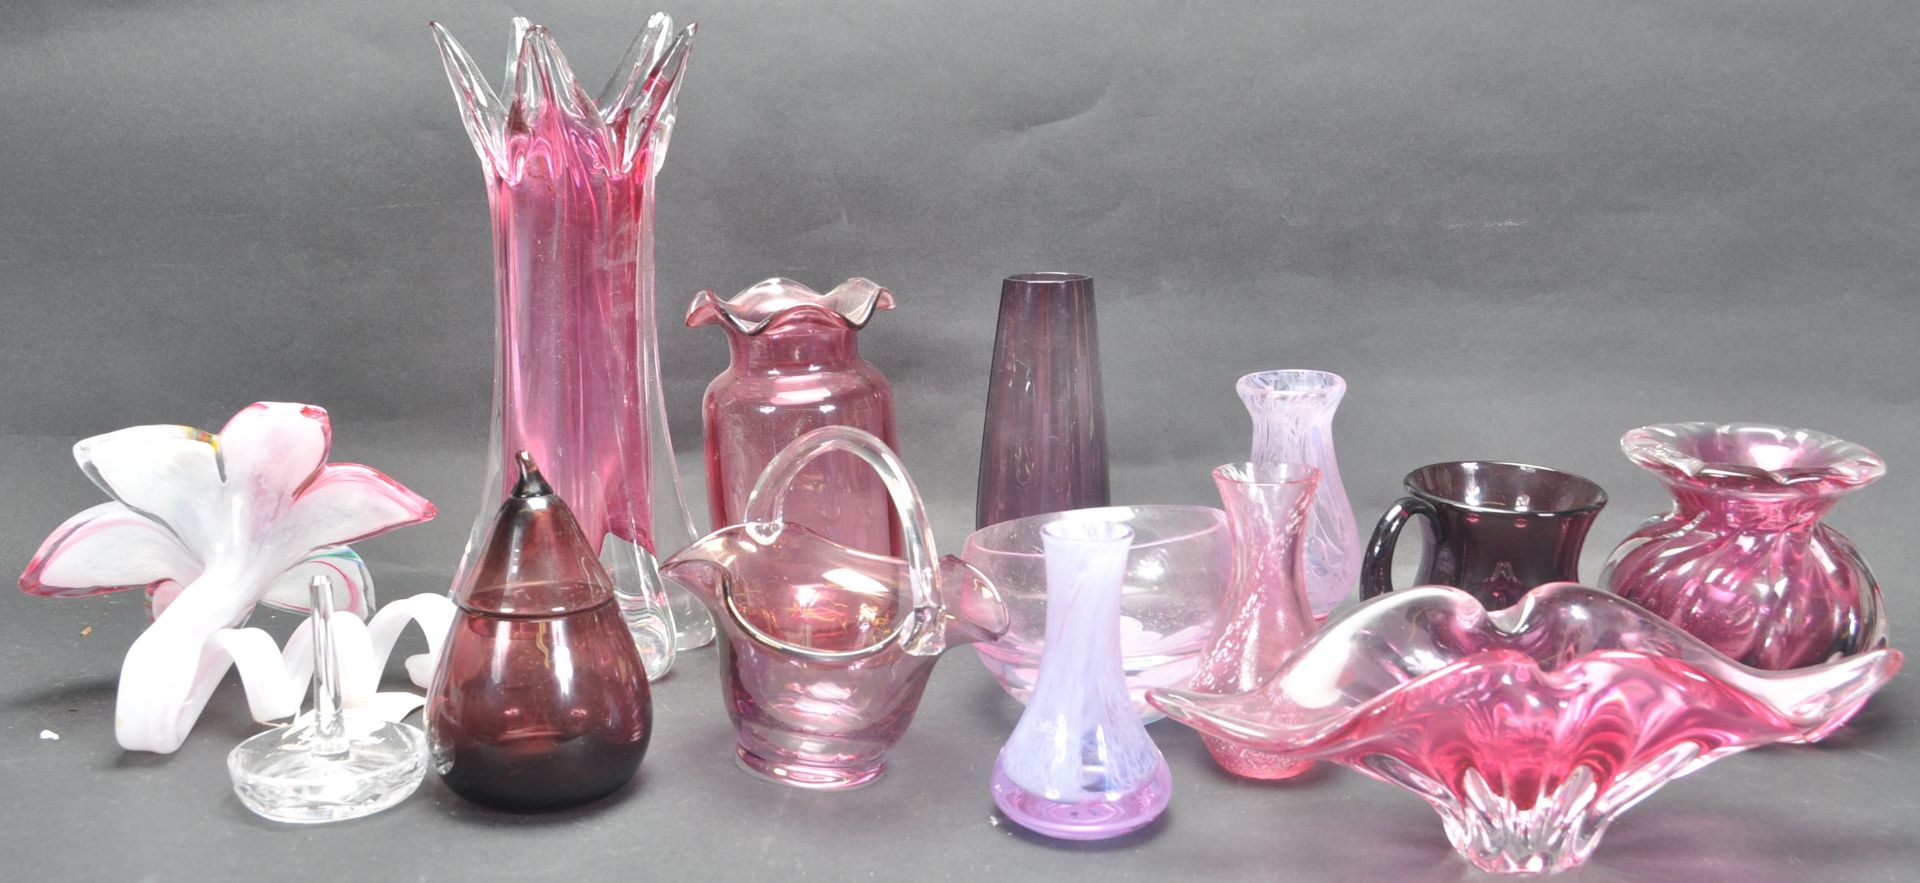 COLLECTION OF 20TH CENTURY GLASS VASES AND ORNAMENTS. - Image 3 of 9